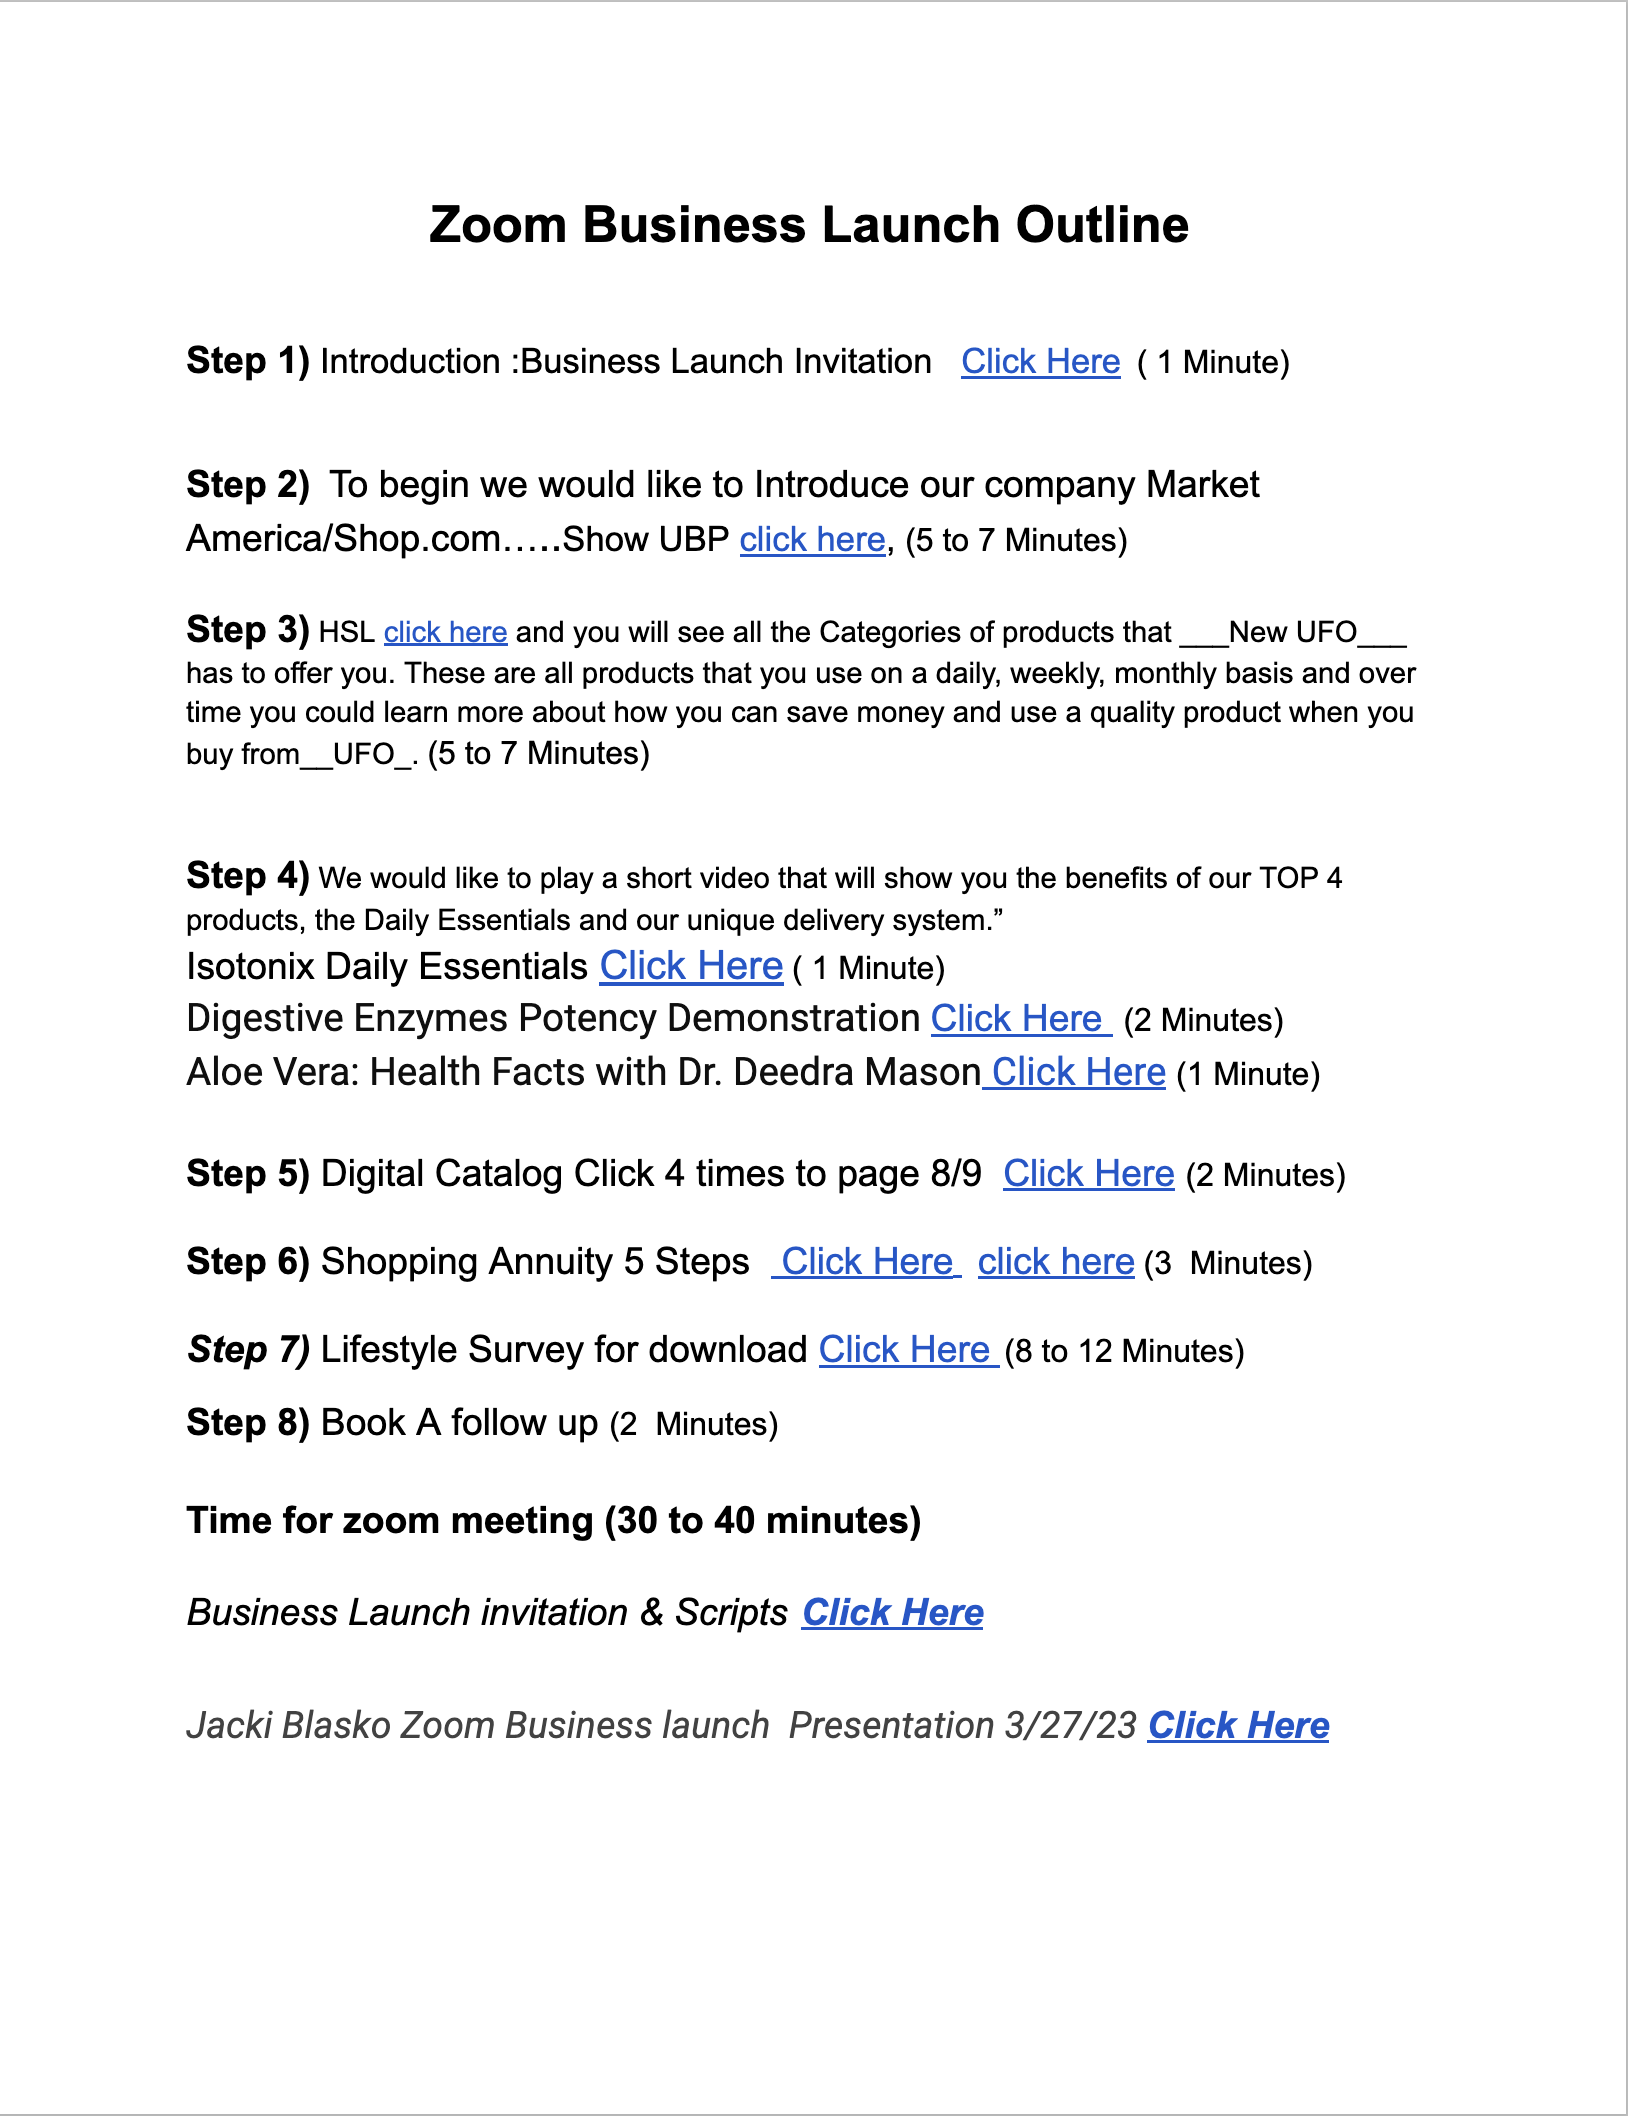 ZOOM Business Launch Outline